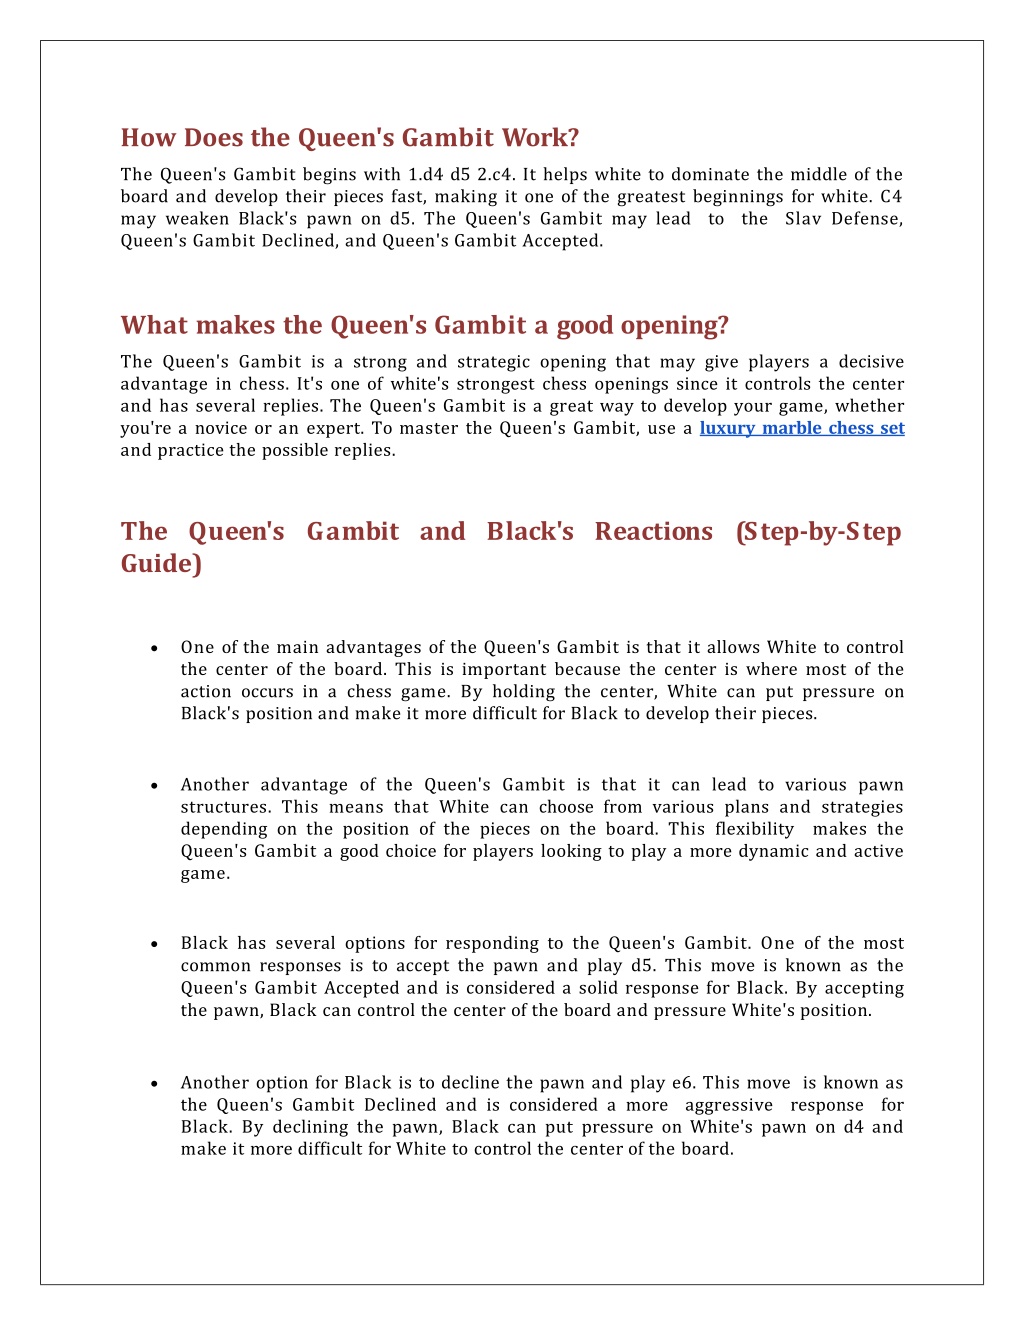 A Comprehensive Guide to the Queen's Gambit Declined 1.d4 d5 2.c4 e6